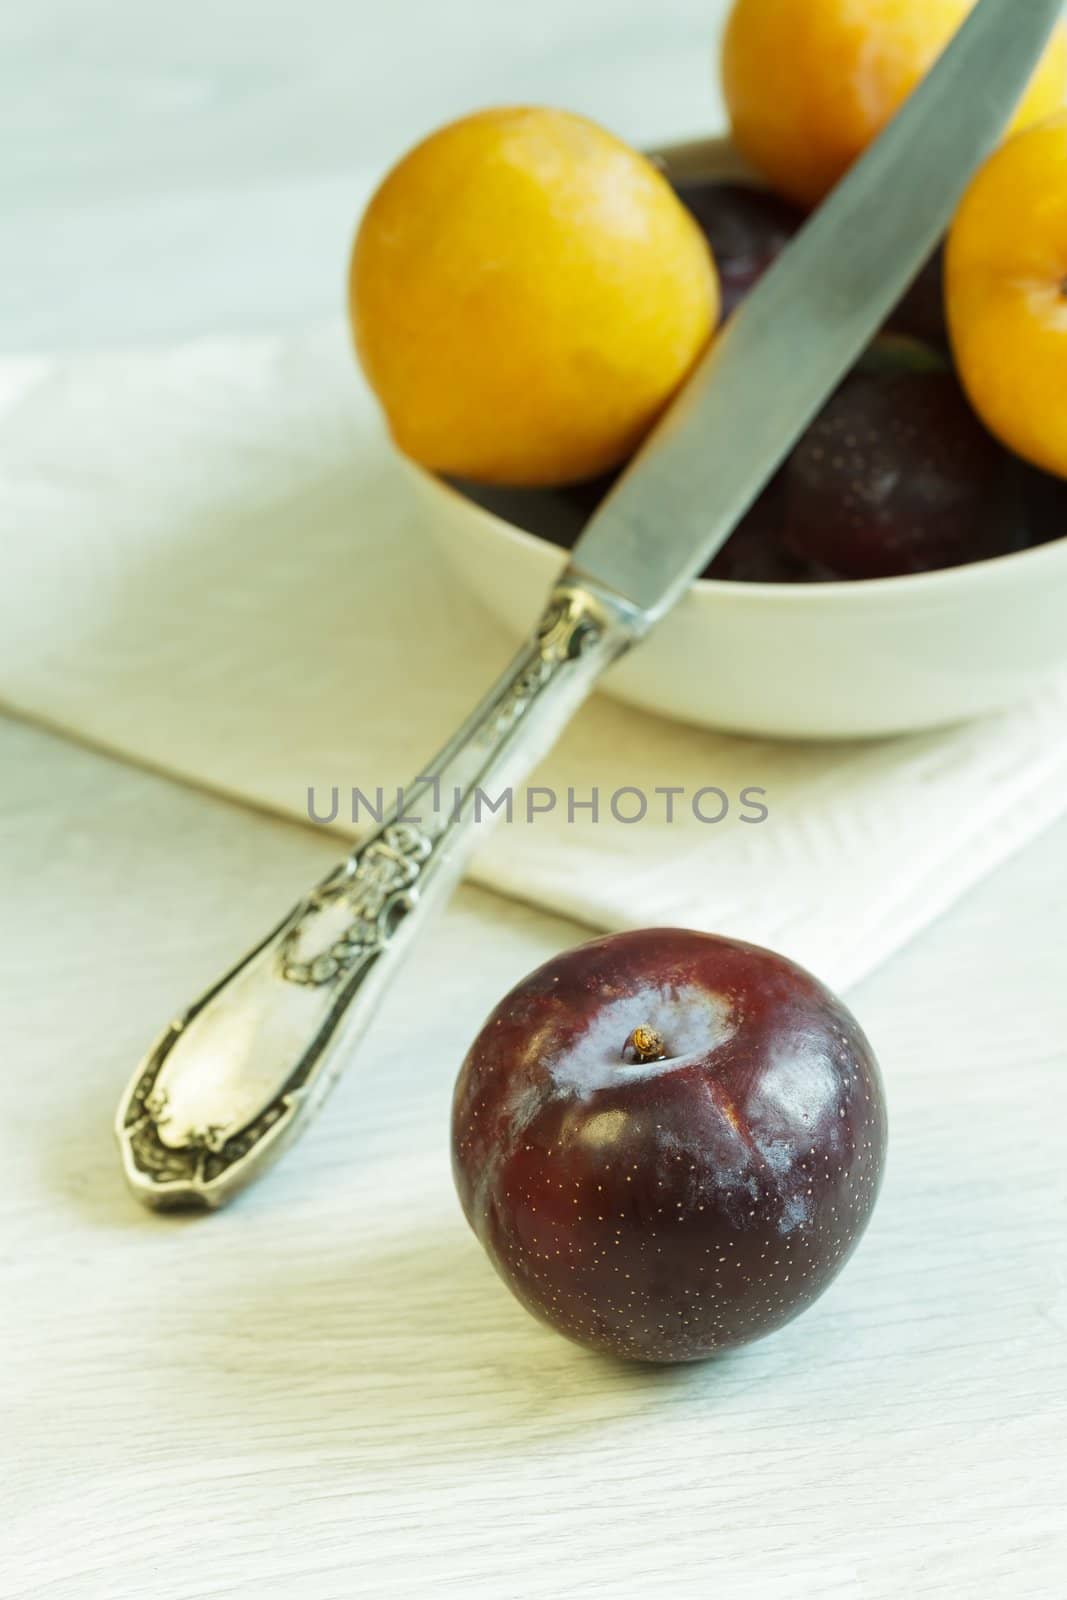 Purple plum and bowl with plums at the background